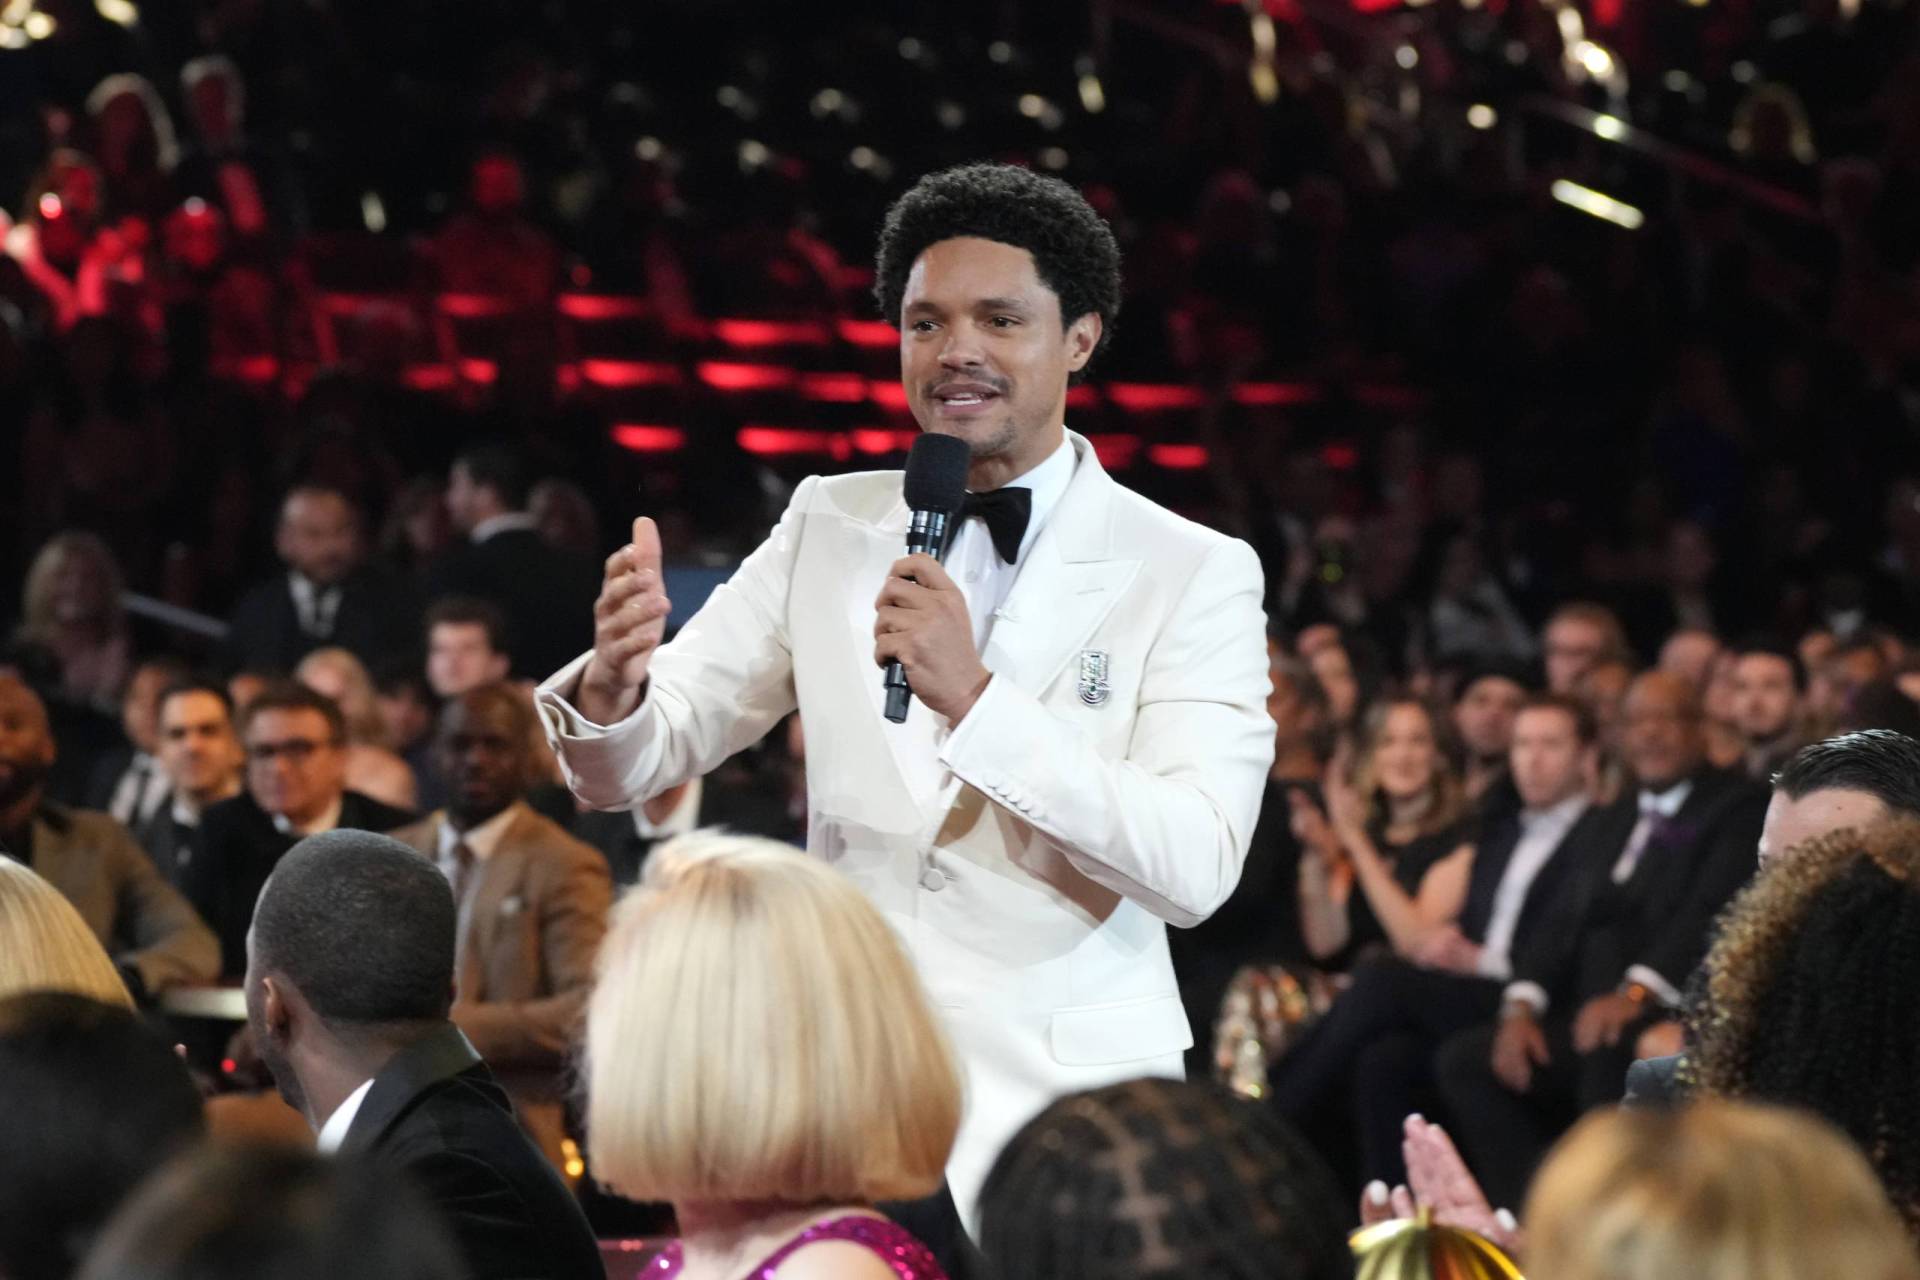 A Black man in a white tuxedo stands among tables full of people, speaking into a microphone.